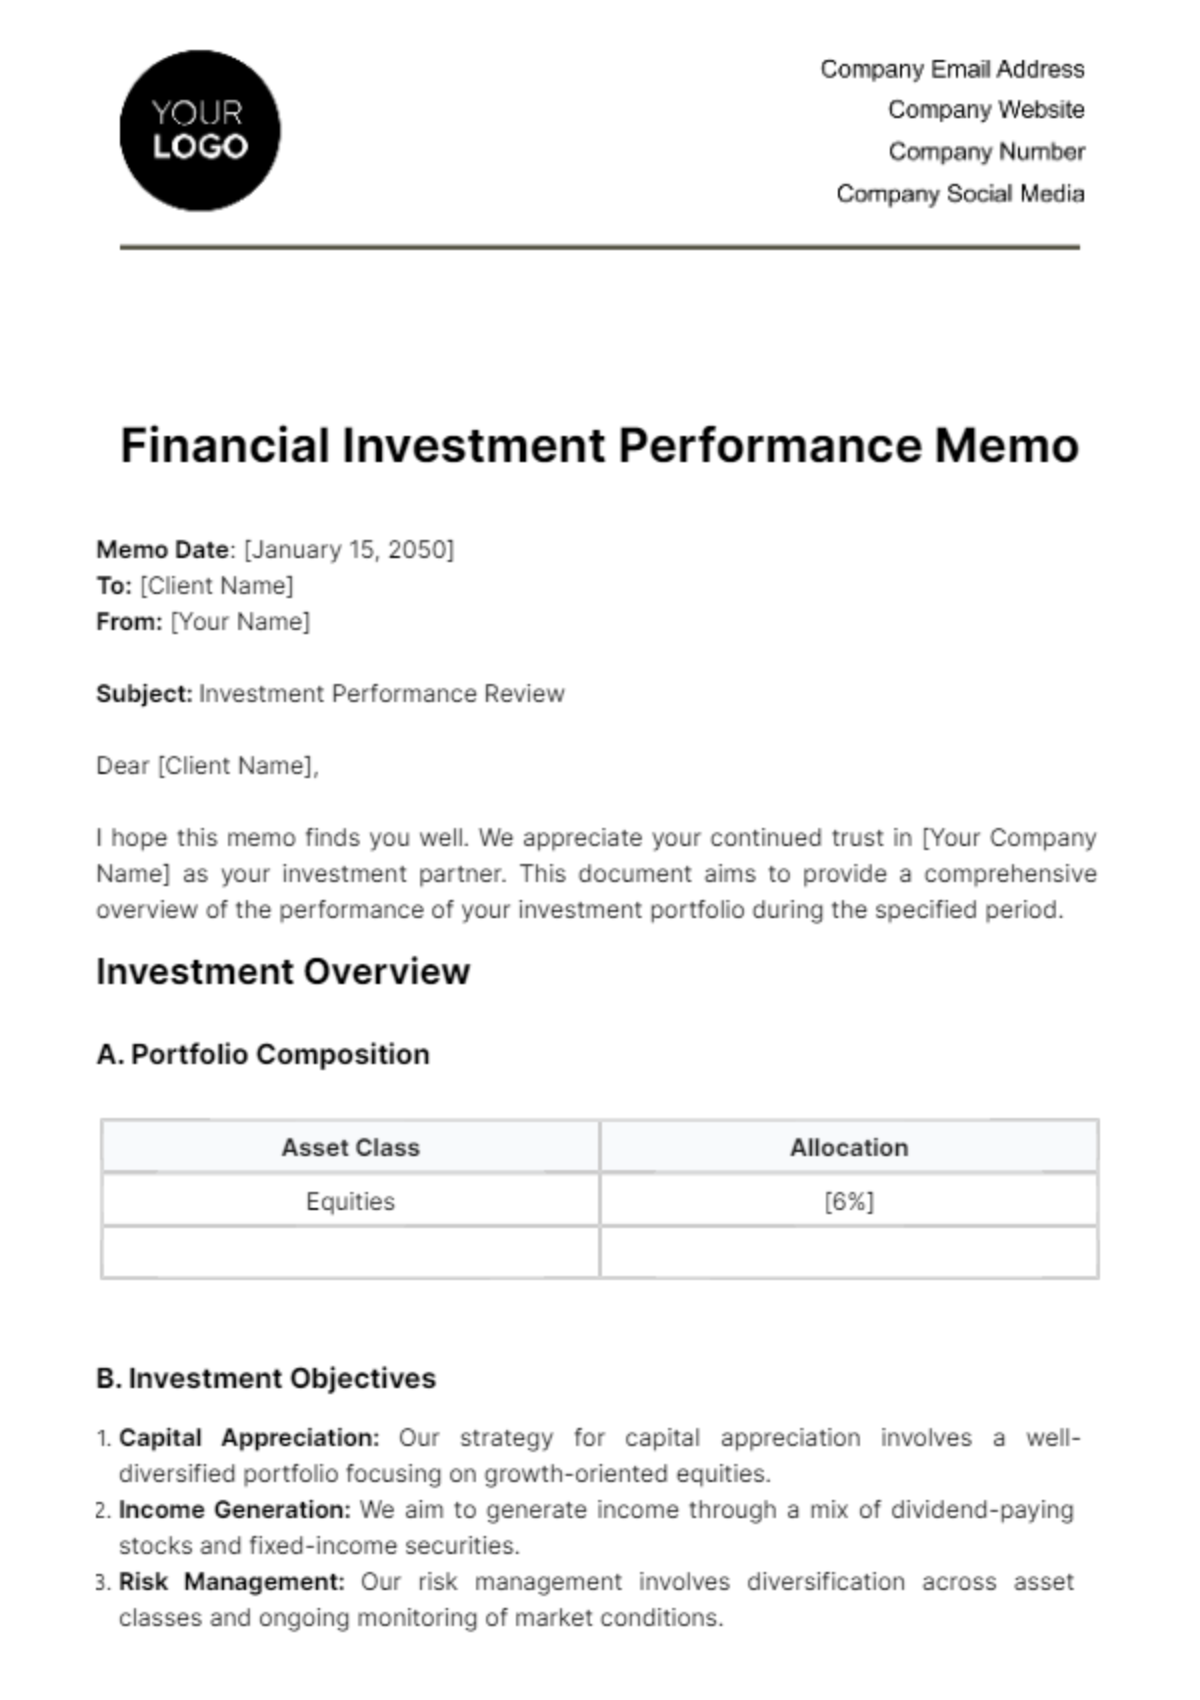 Financial Investment Performance Memo Template